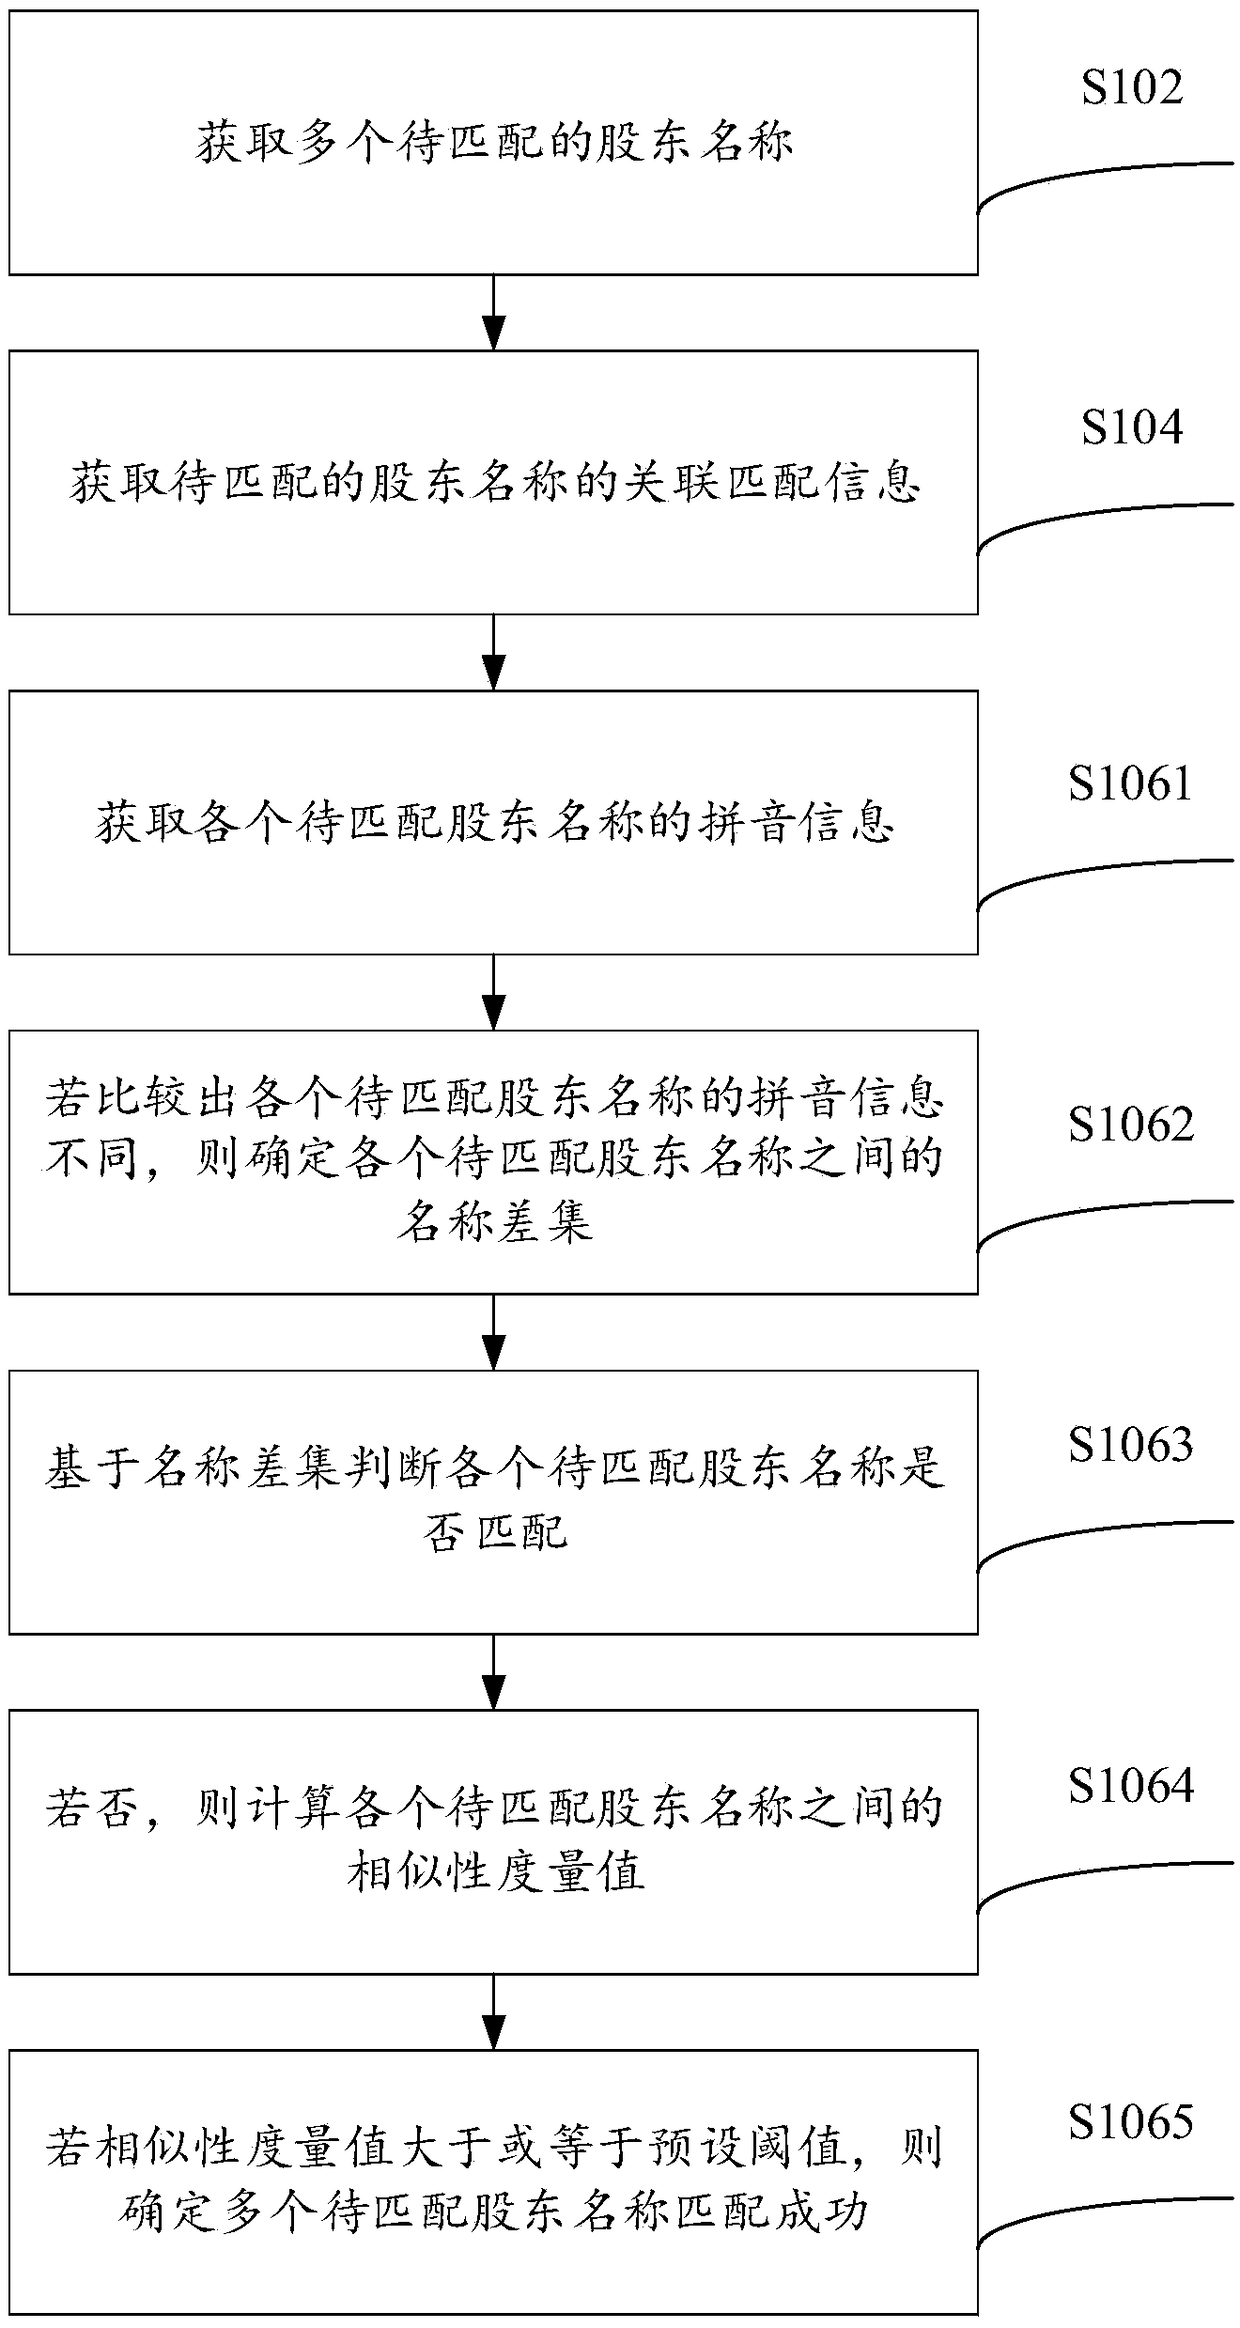 A method and a device for associating and matching shareholder names